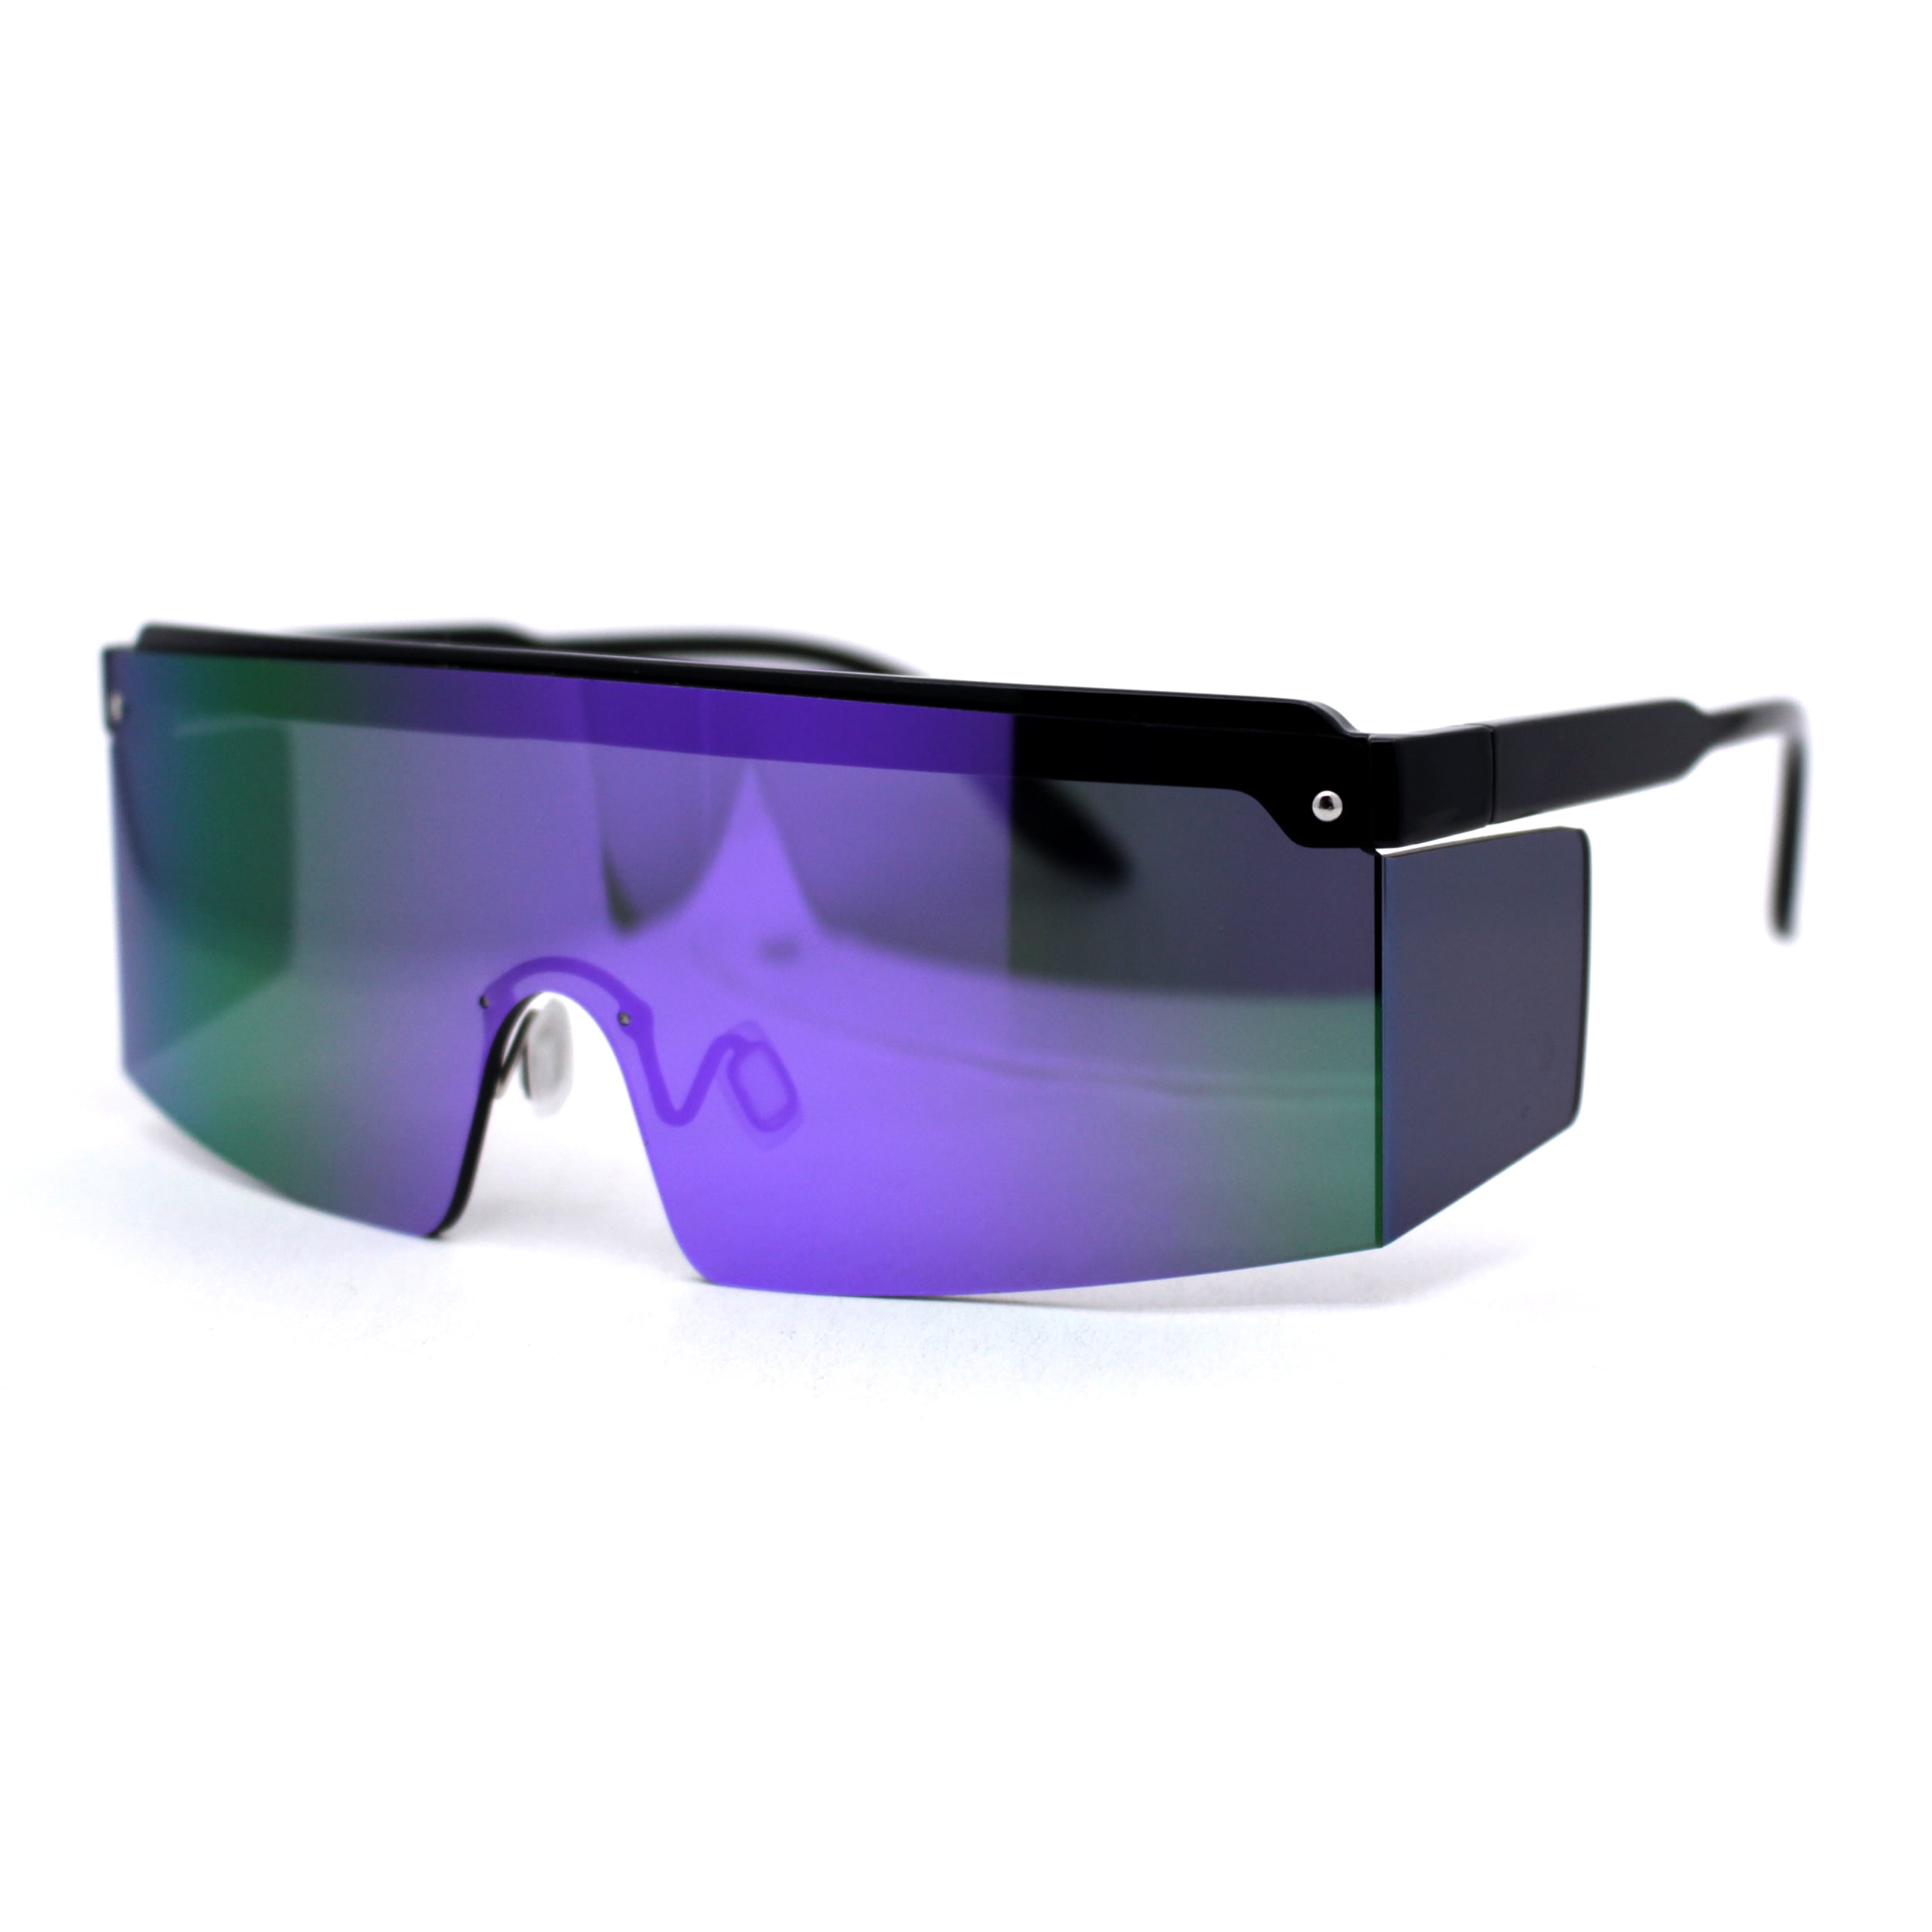 Men's Blade Sport Sunglasses With Gradient Mirrored Lenses - All In Motion™  Purple : Target